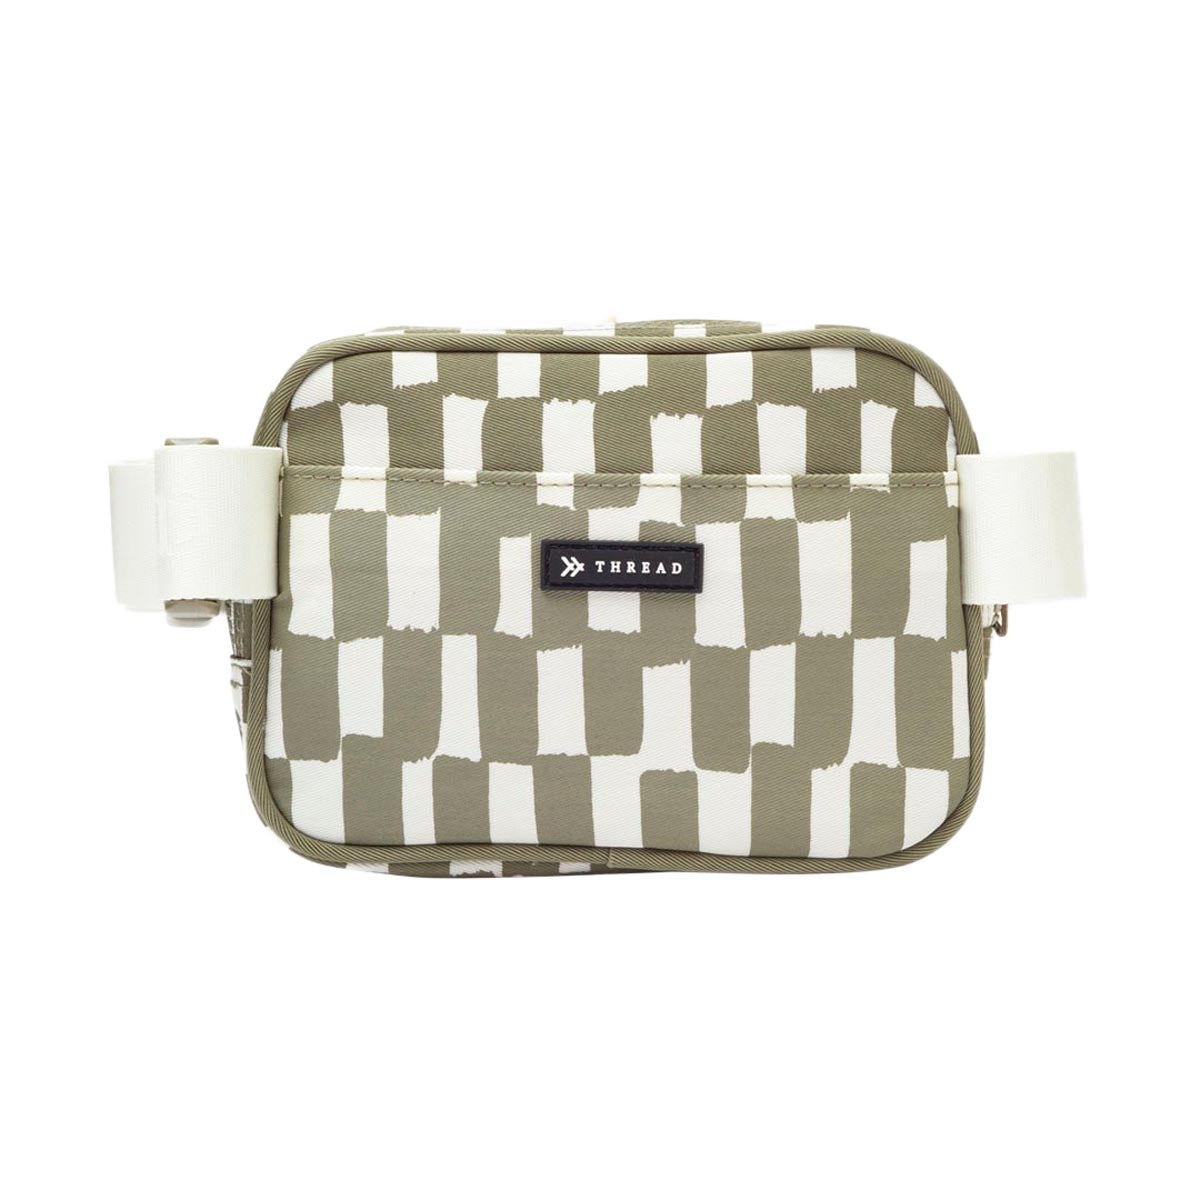 Thread Fanny Pack Bag - Scout image 2